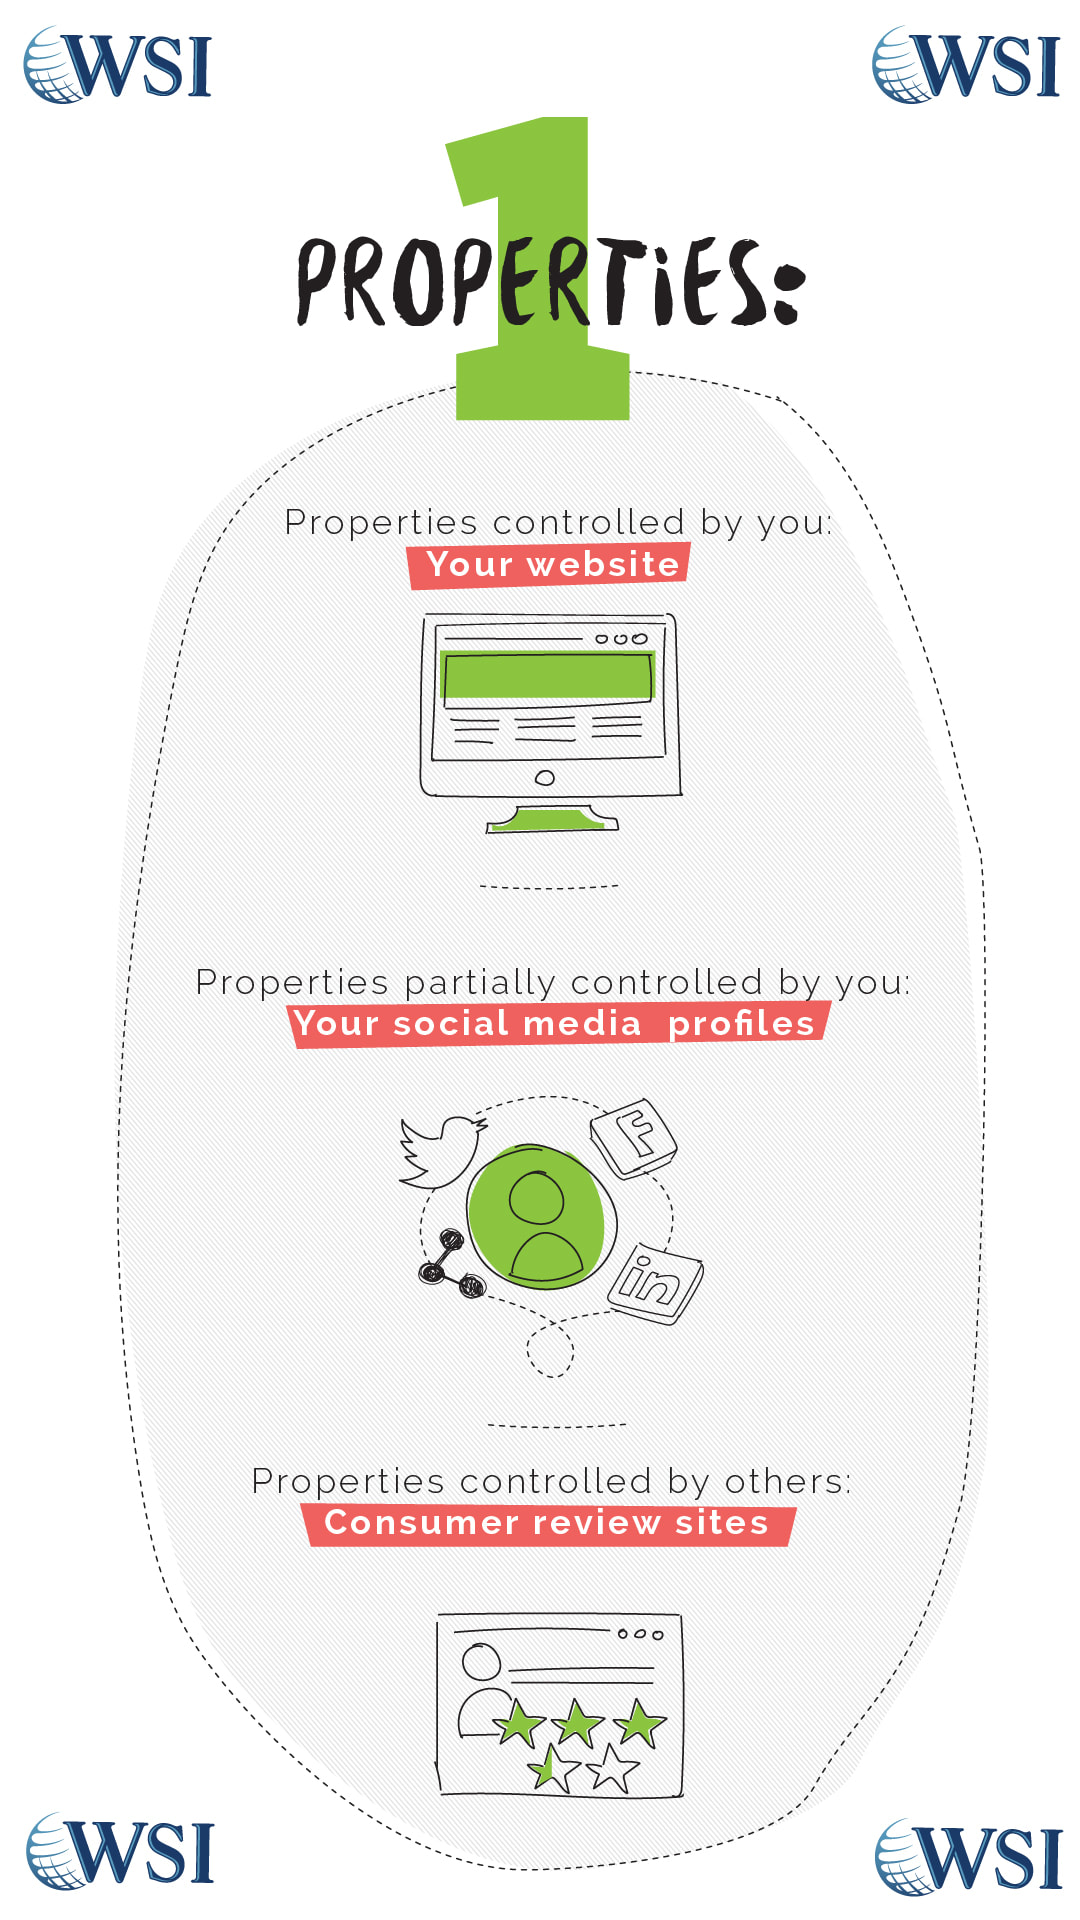 Marketing - Properties controlled is your website